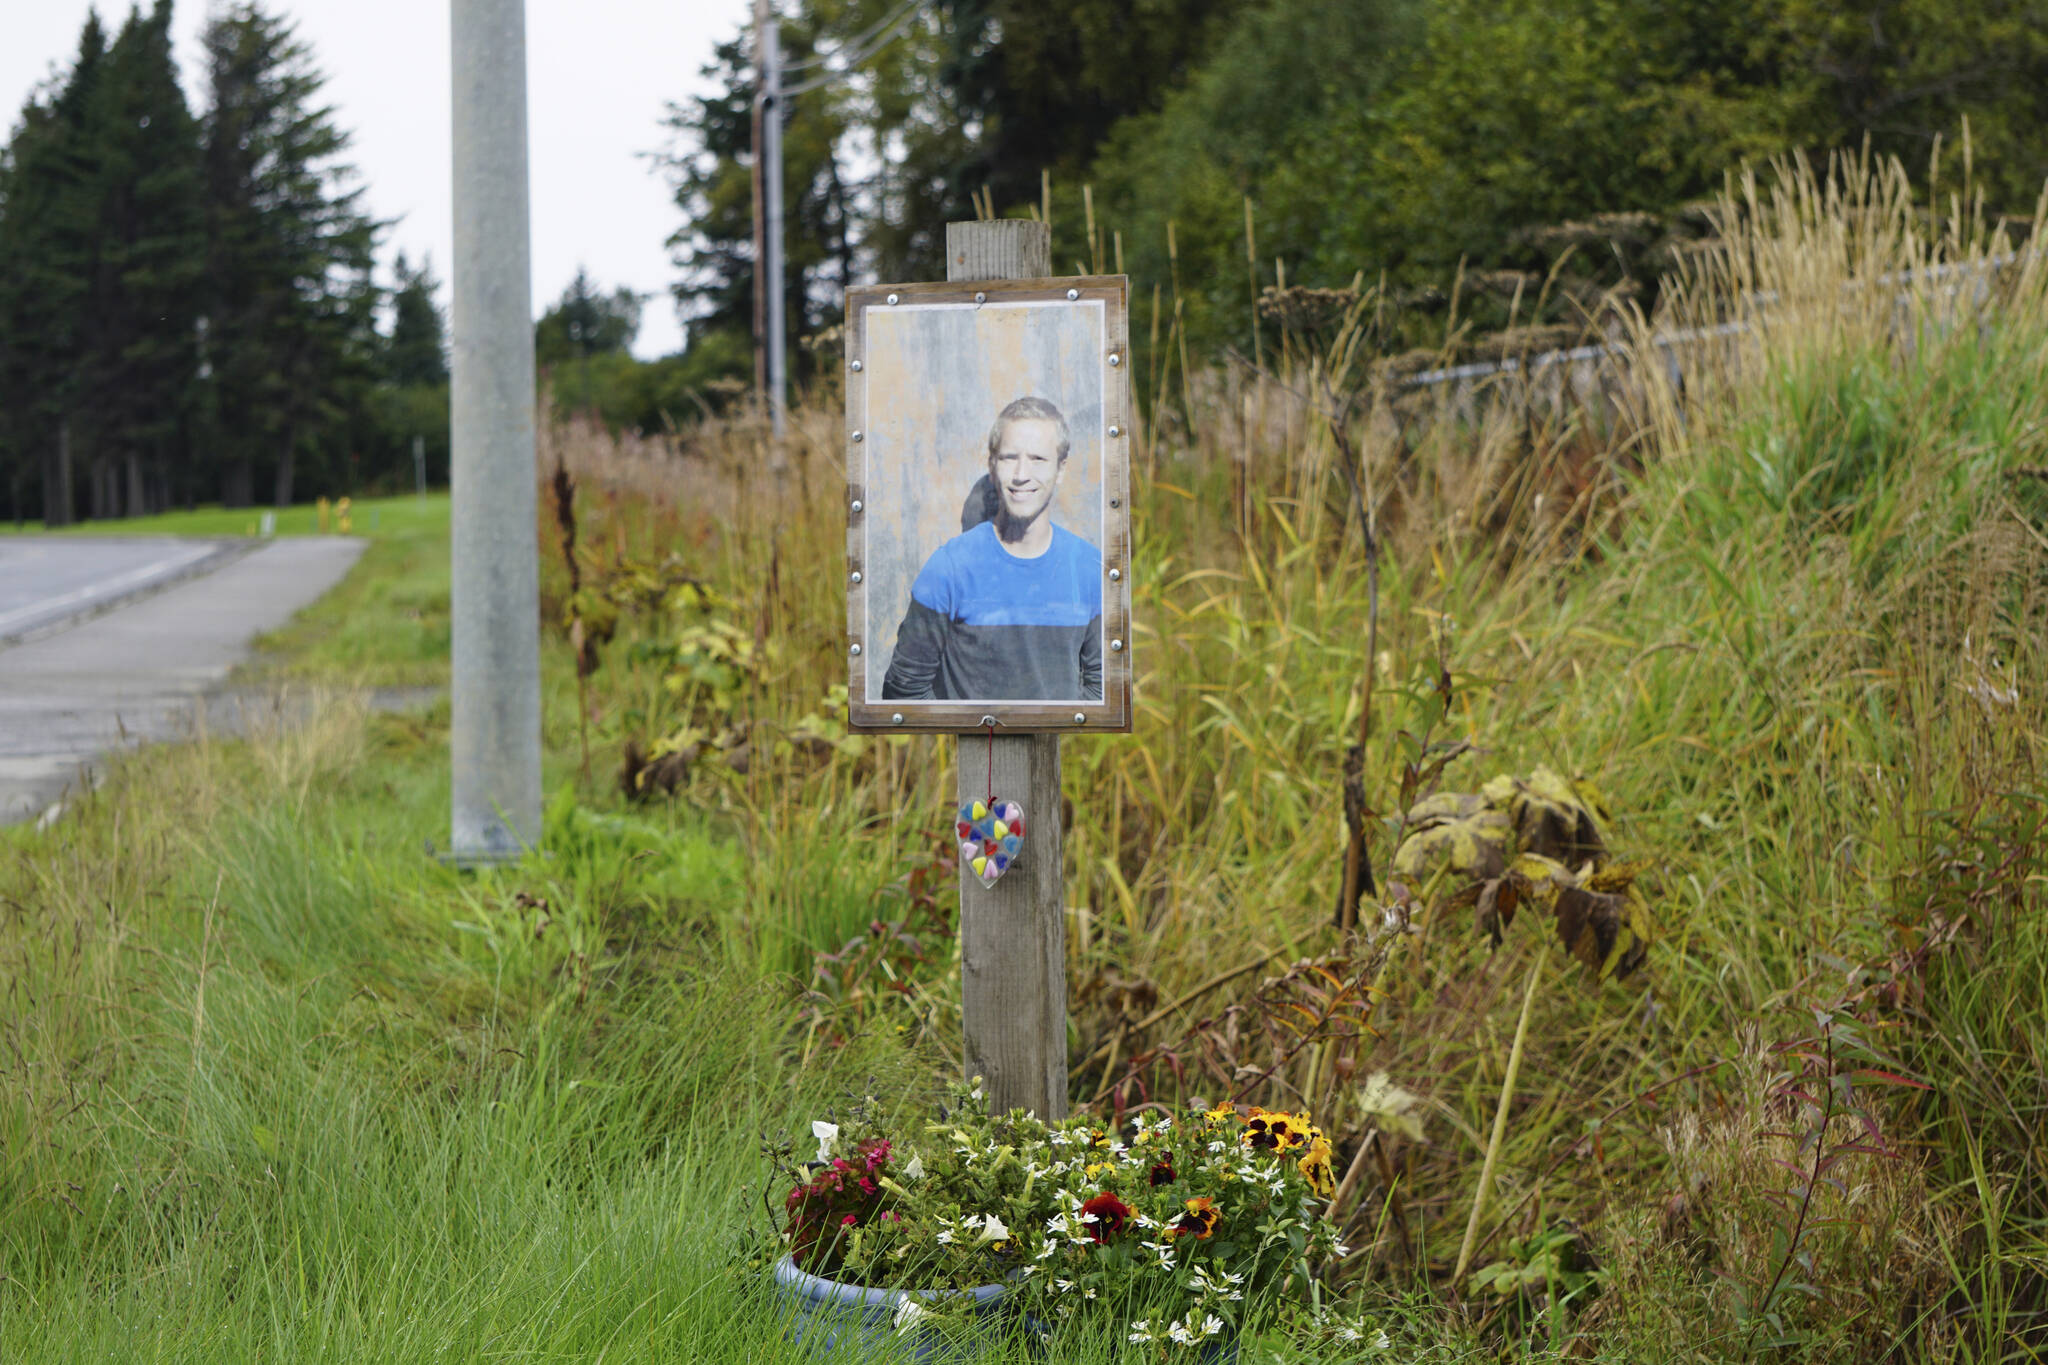 A memorial for Drew Brown with his photo, flowers and a heart sculpture was installed at the site where he died in a car crash on the Sterling Highway, as seen here on Friday, Sept. 16, 2022, in Homer, Alaska. (Photo by Michael Armstrong/Homer News)